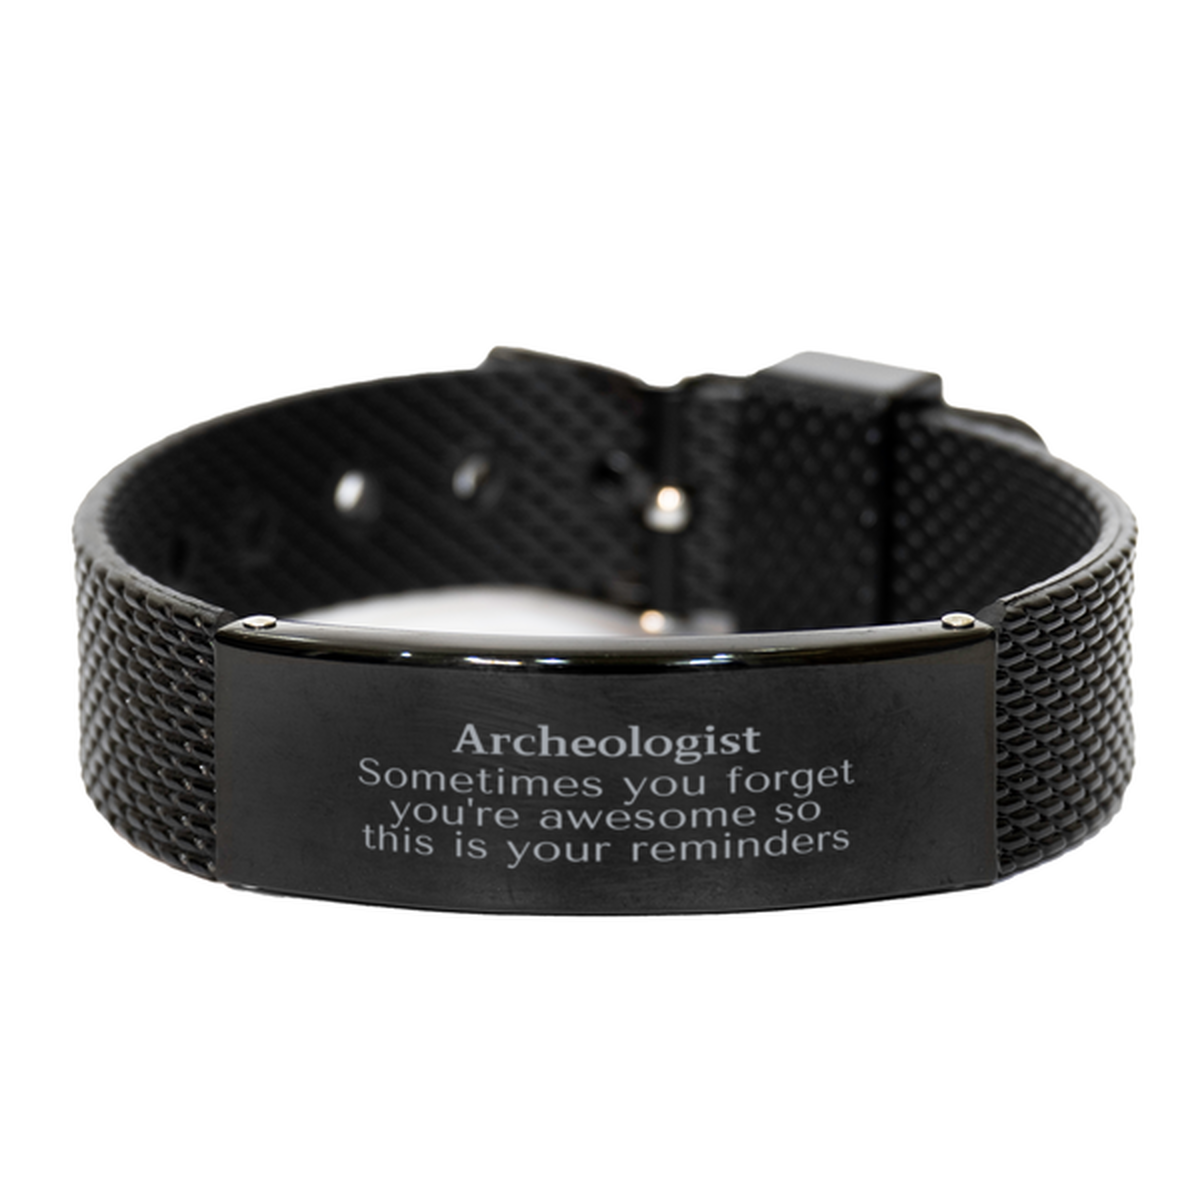 Sentimental Archeologist Black Shark Mesh Bracelet, Archeologist Sometimes you forget you're awesome so this is your reminders, Graduation Christmas Birthday Gifts for Archeologist, Men, Women, Coworkers